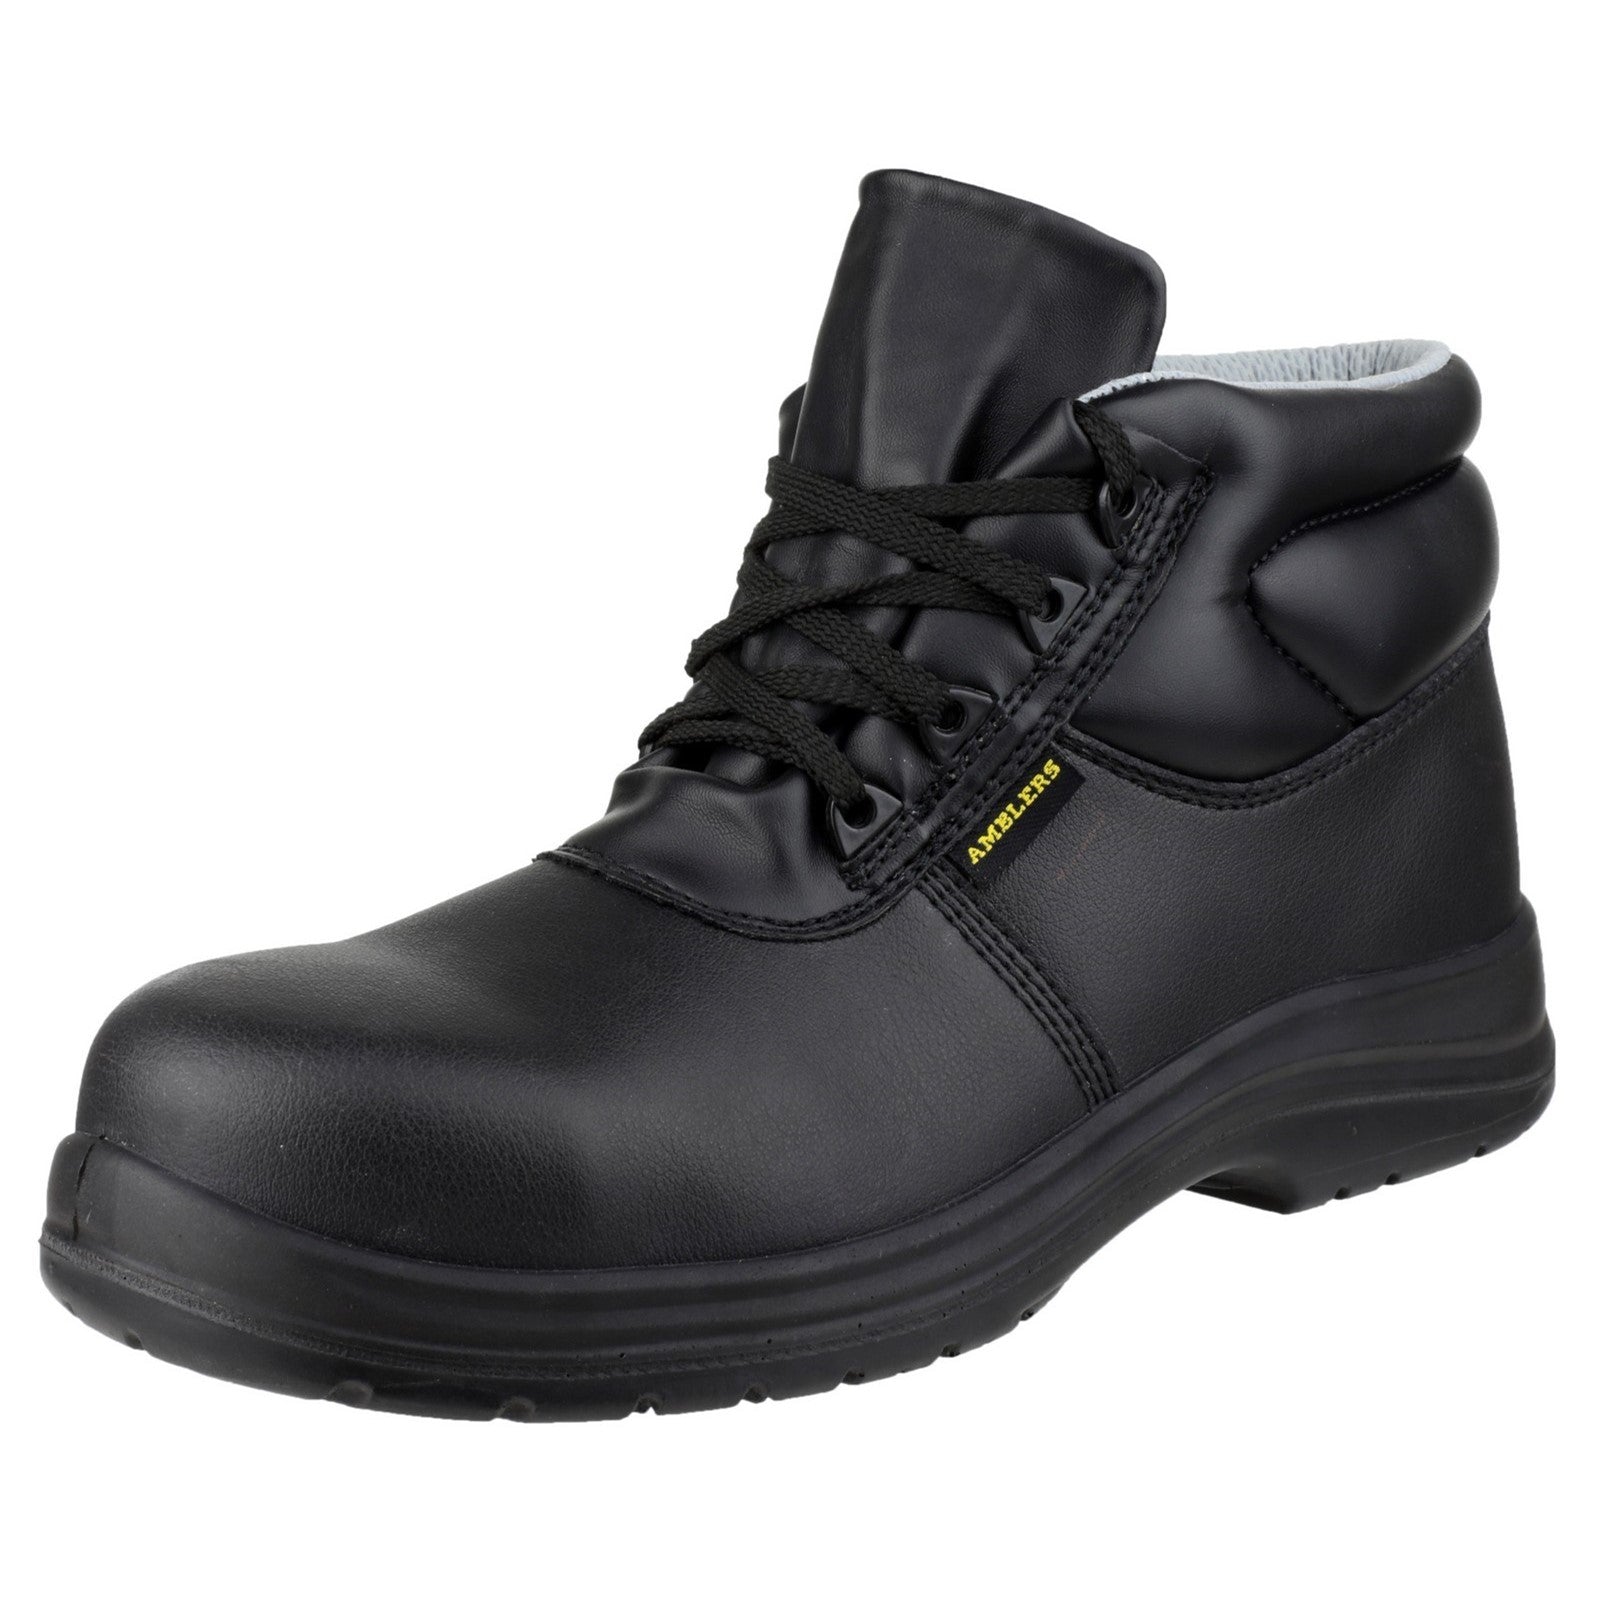 Amblers FS663 Safety Boot